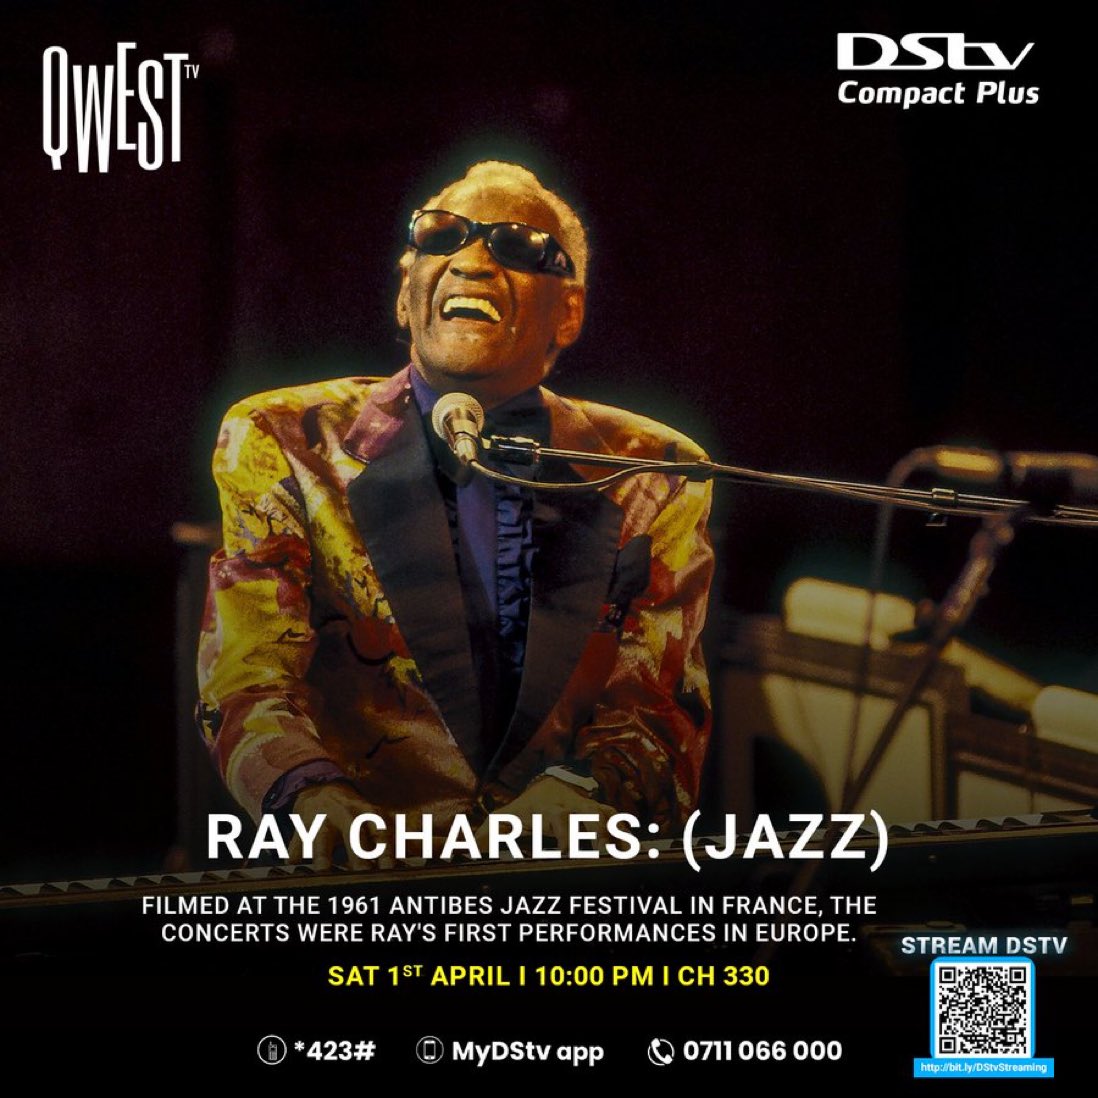 Are you in a mood for some good gospel songs? Qwest Tv got you! 🎶🔥

Ray Charles: (Jazz) | 10 pm | Qwest TV Ch. 330

Download #MyDStv App or Dial ✳423# to buy, pay, reconnect, or clear error codes.

#DoSometv #WhereMusicLives